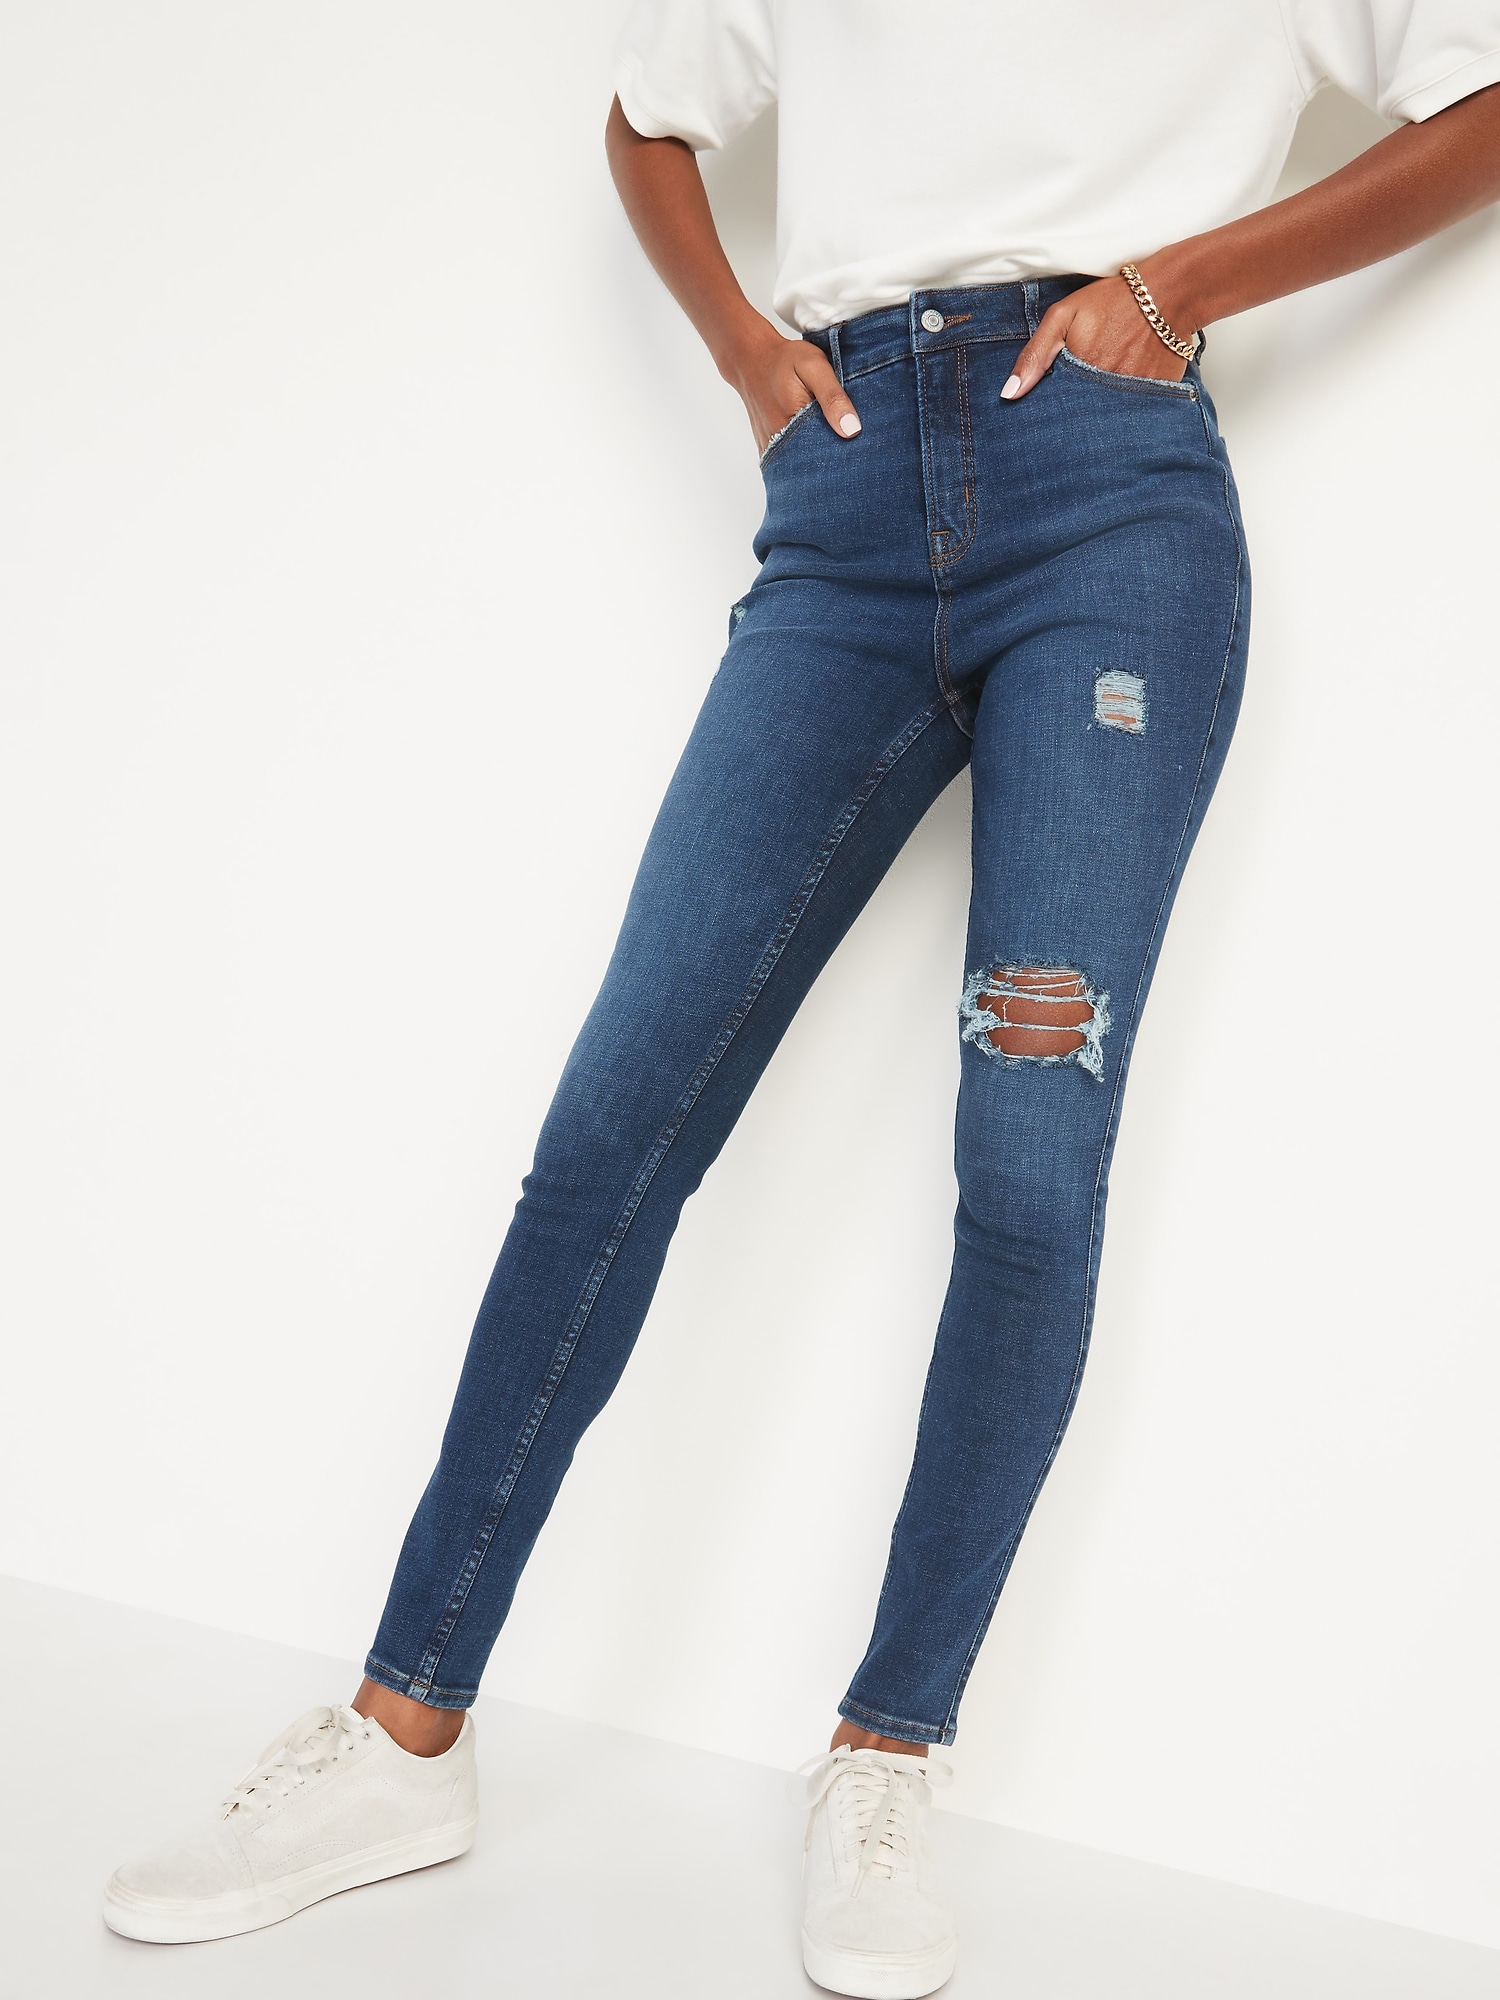 Rockstar super skinny Extra High Rise Distressed Ripped Jeans for